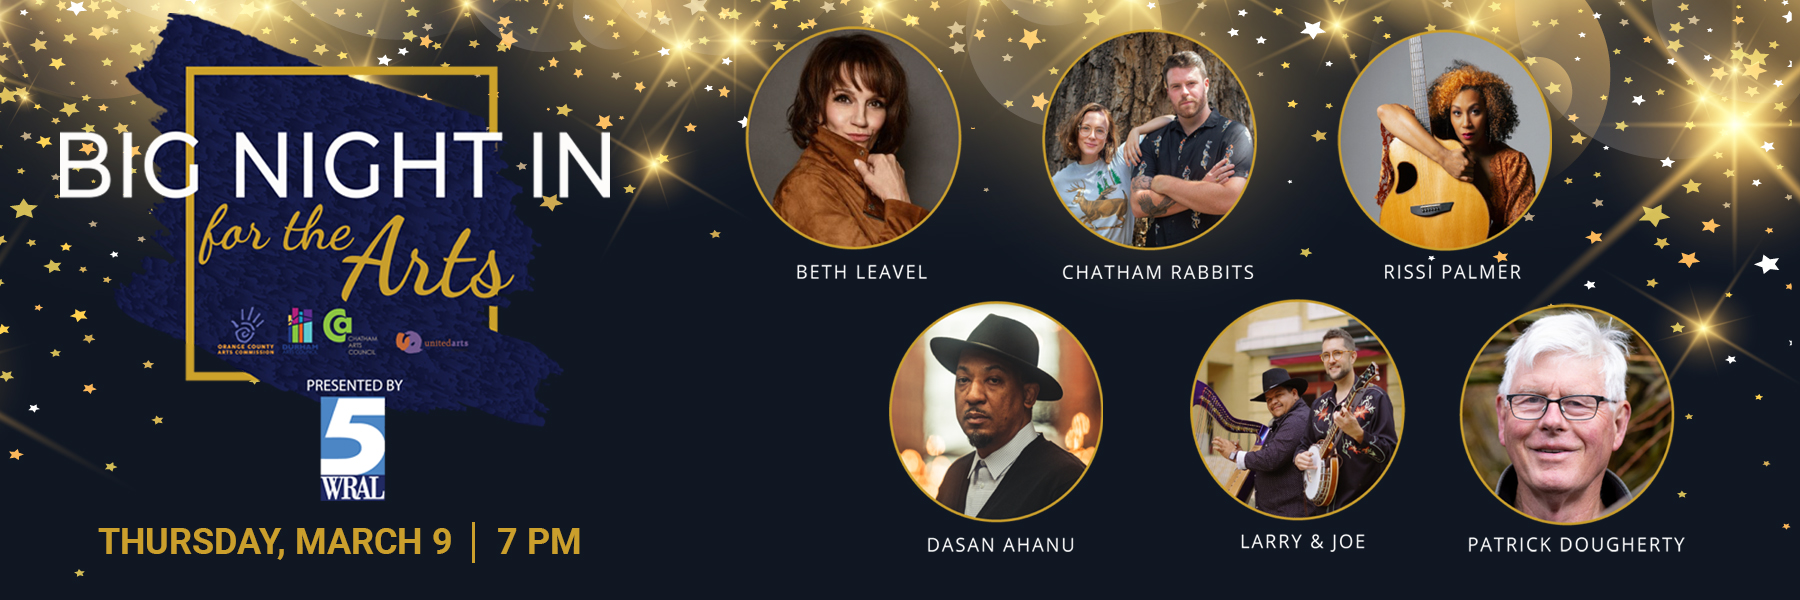 Graphic with blue background with gold stars, the Big Night In for the Arts logo, headshots of Beth Leavel, Chatham Rabbits, Rissi Palmer, Dasan Ahanu, Larry & Joe, and Patrick Dougherty